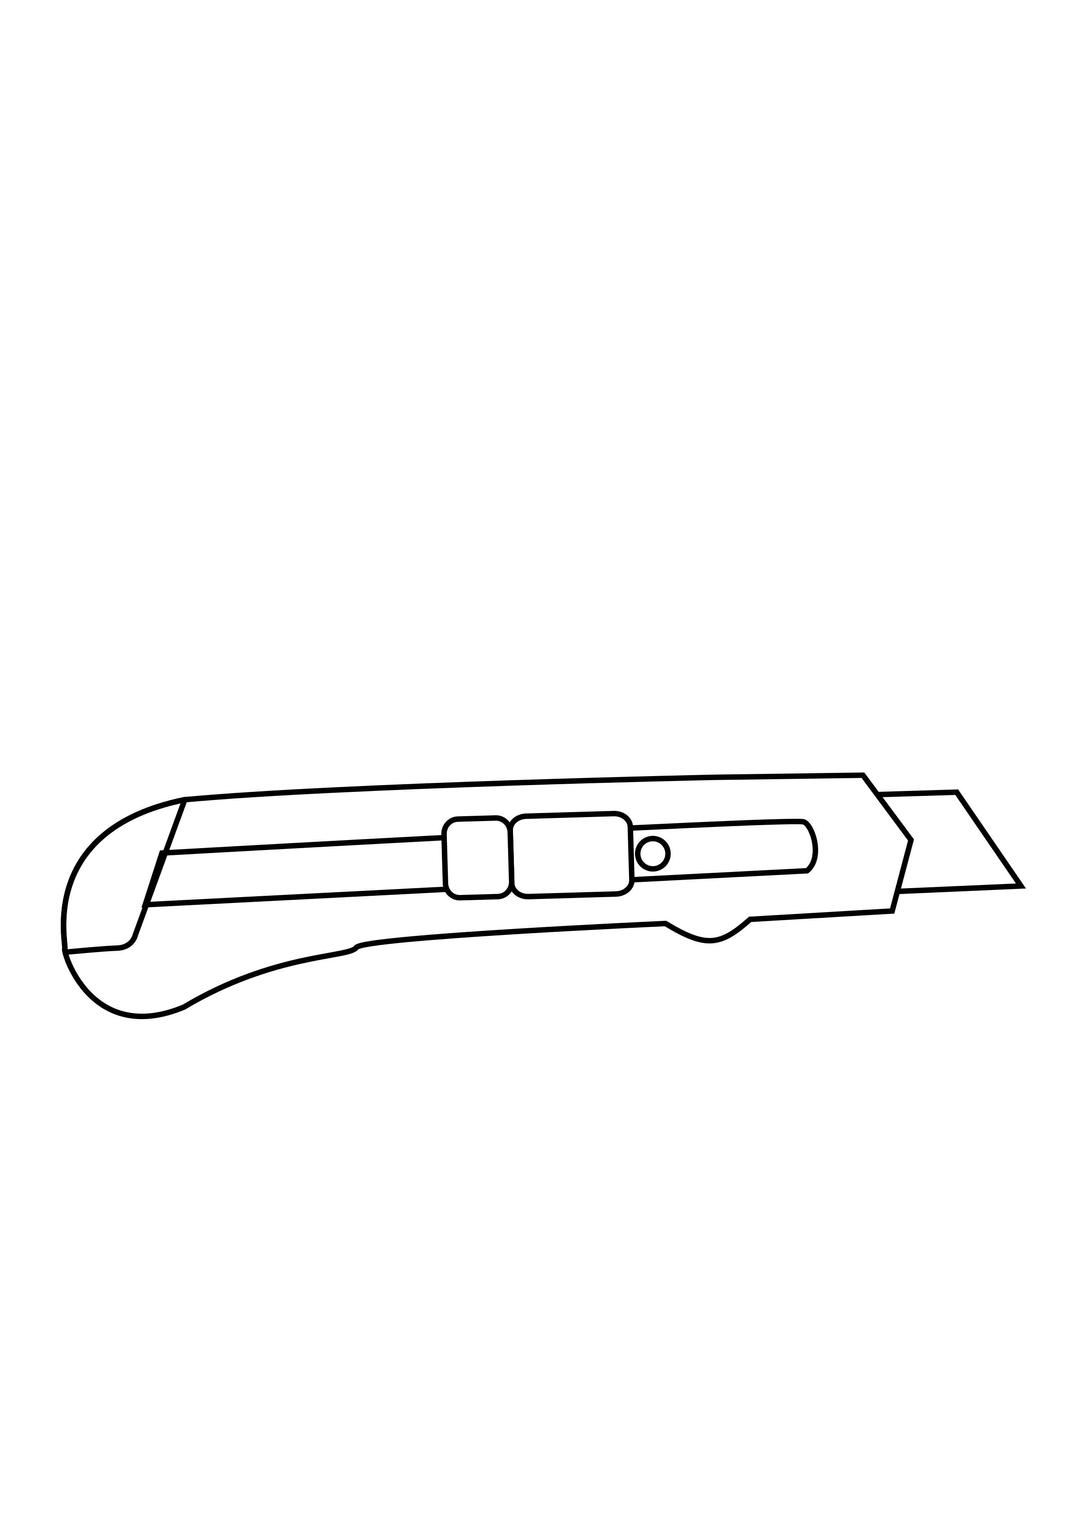 tool x-acto knife drawing coloring png transparent